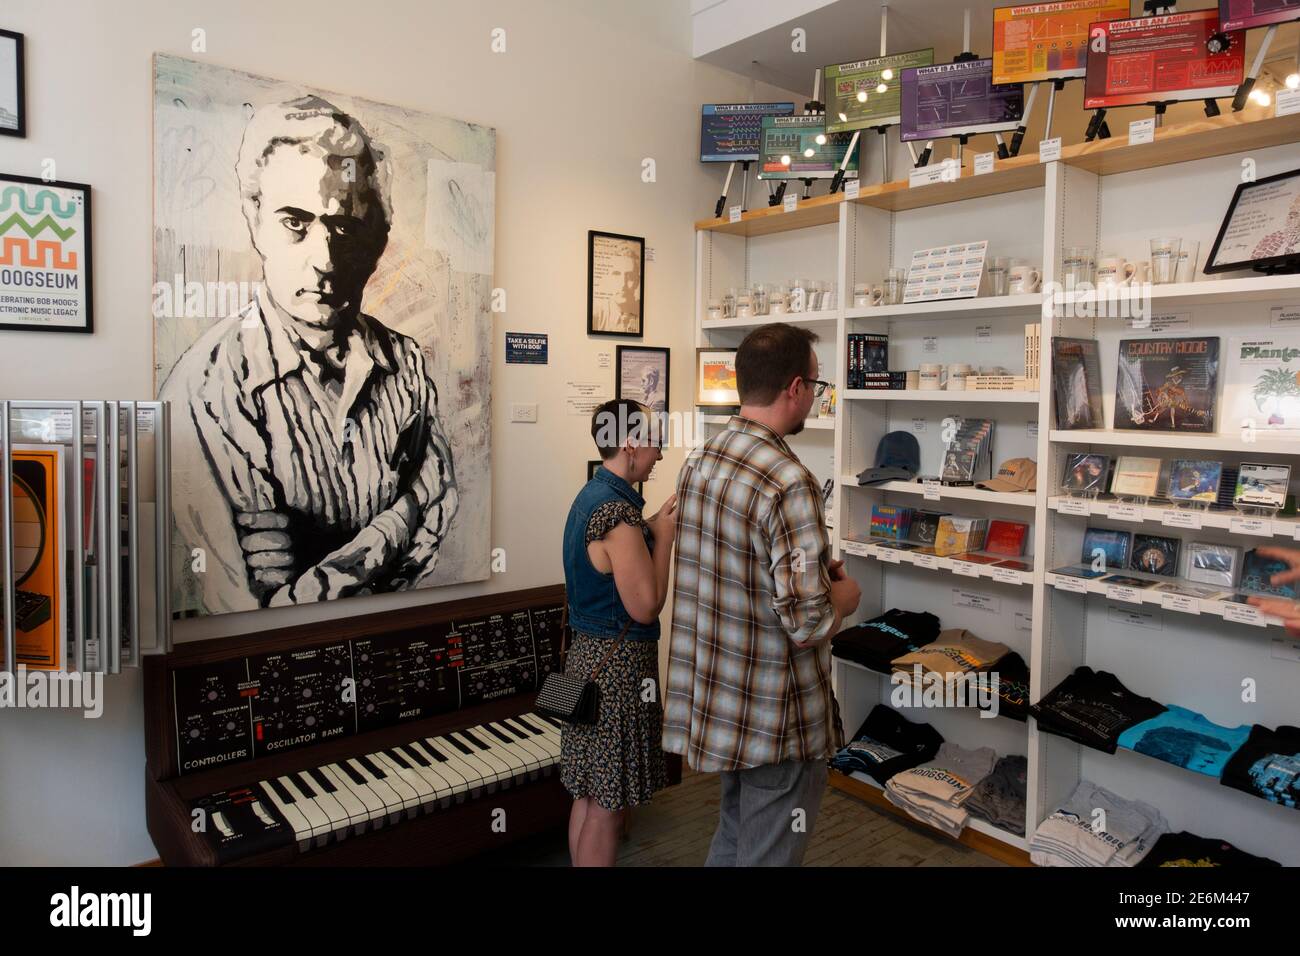 Moogseum museum in downtown Asheville North Carolina Stock Photo